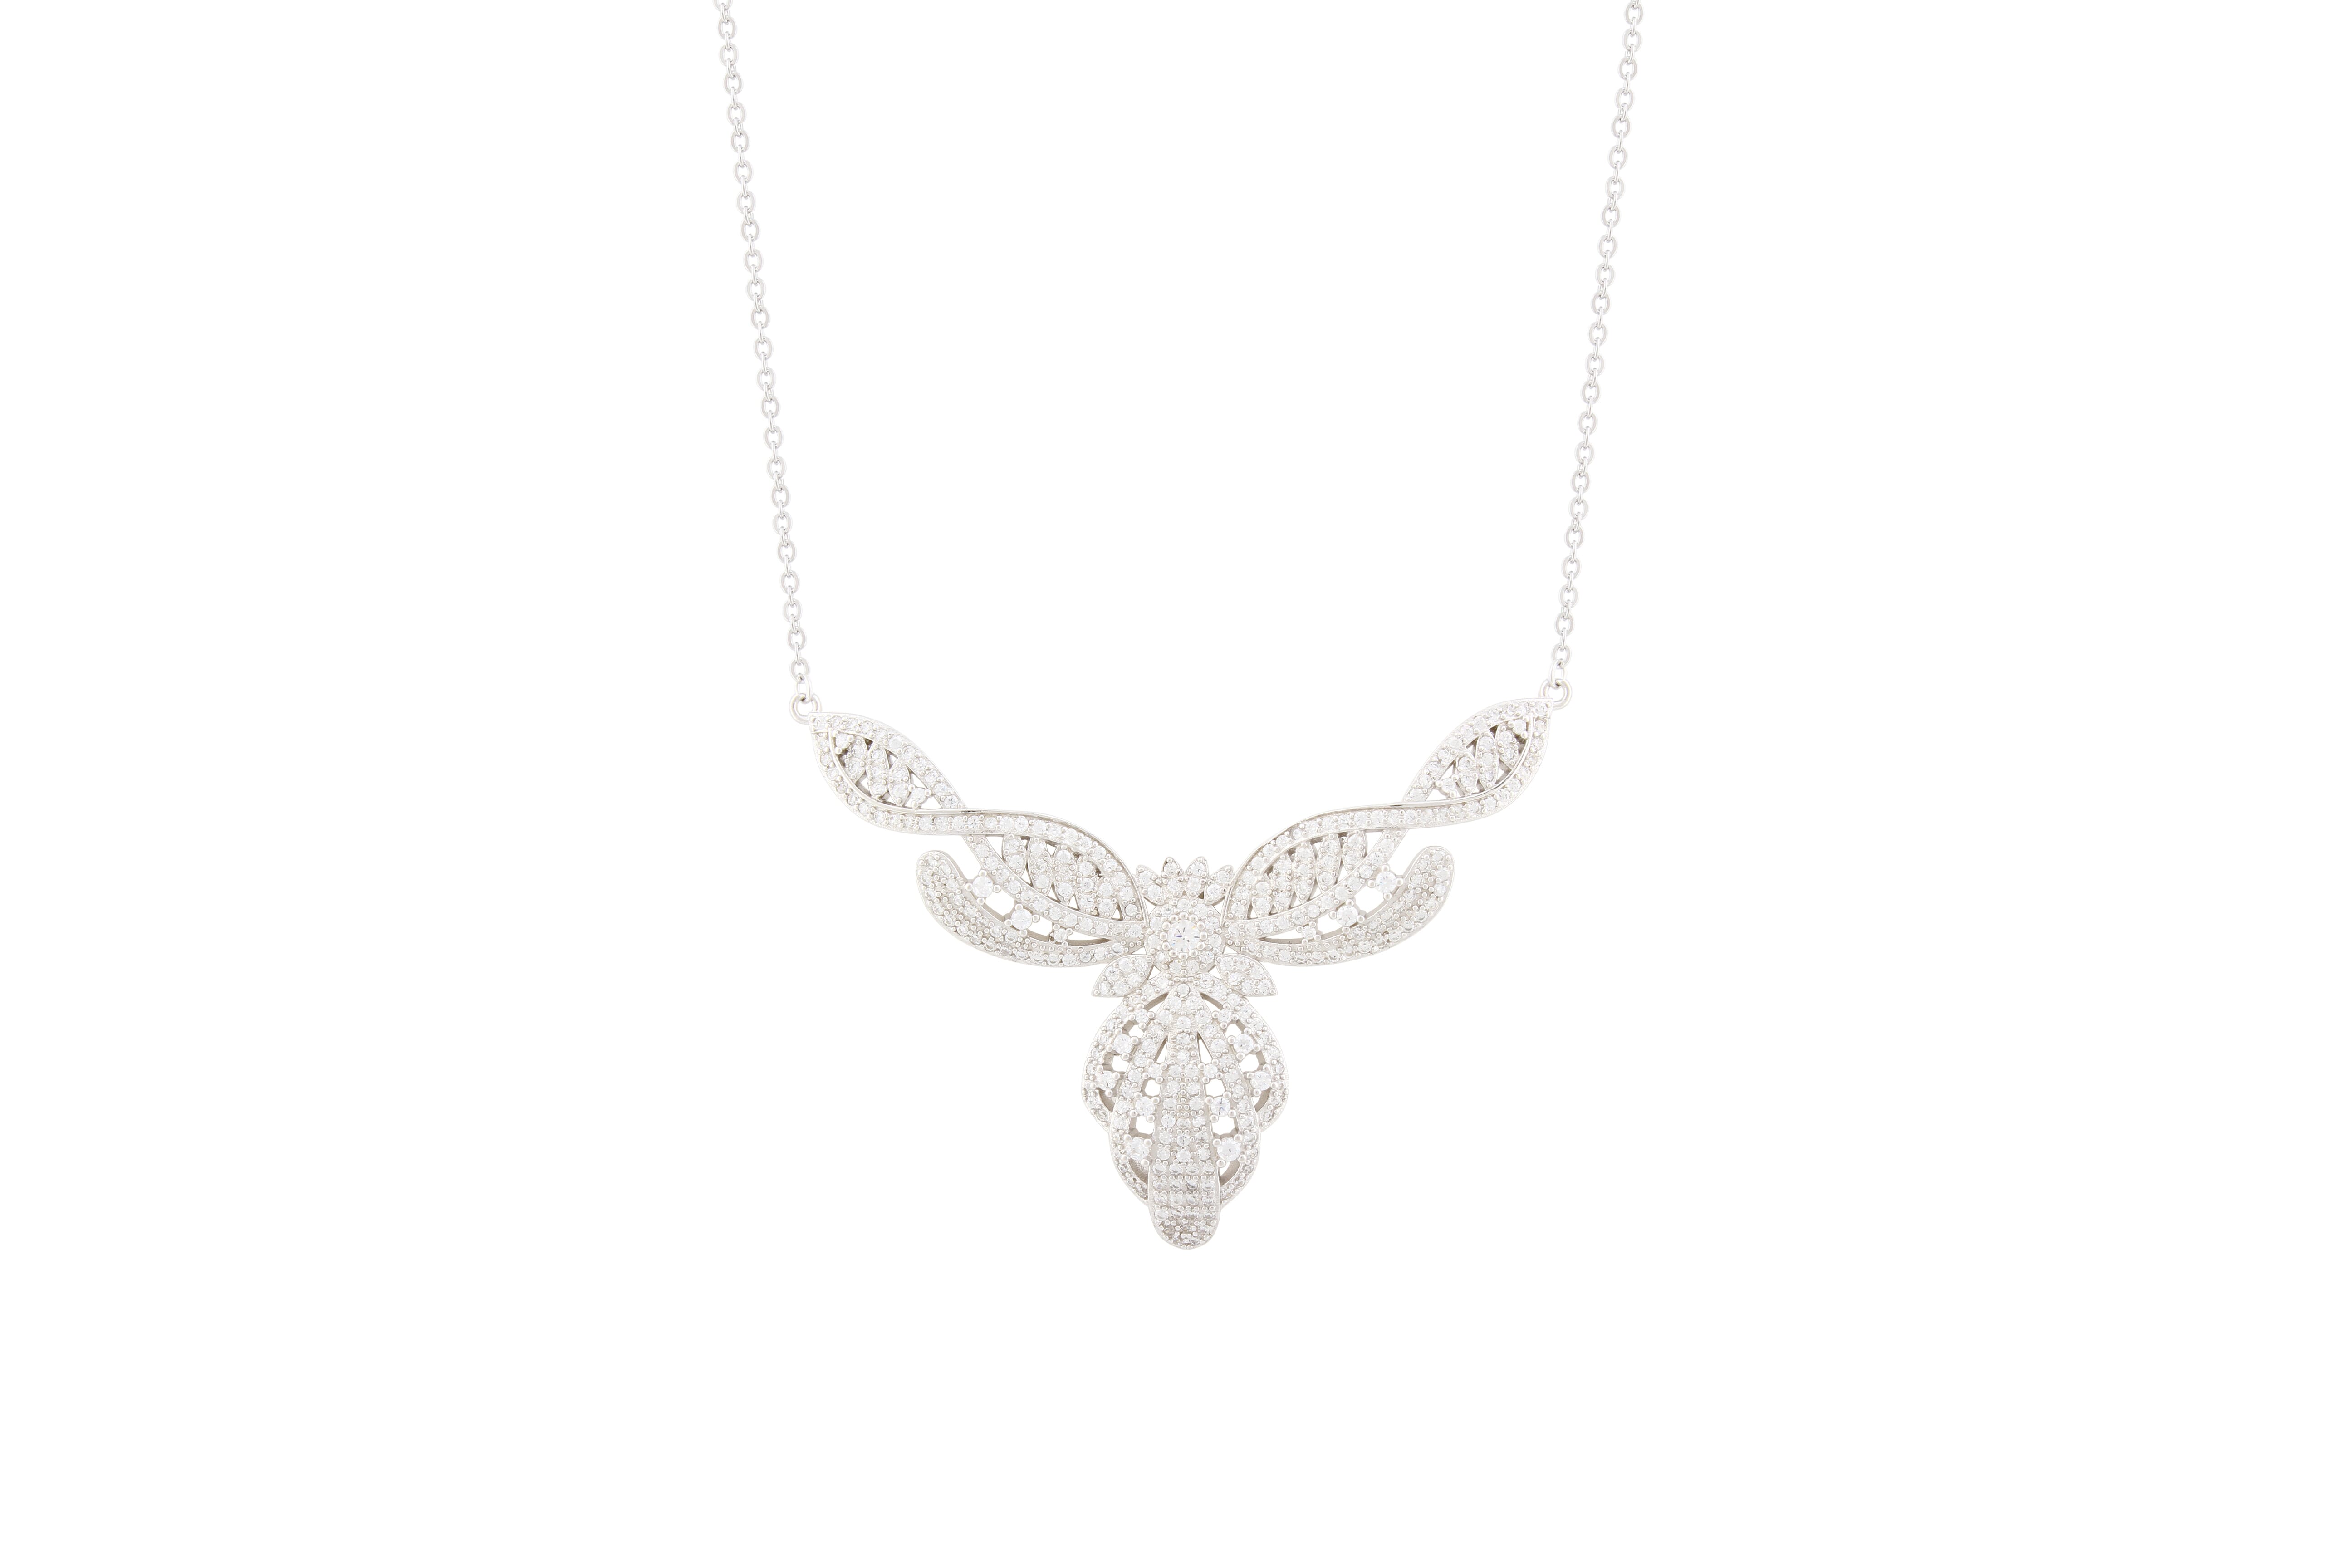 Asfour Crystal  Necklace With Art Deco Design NR0521